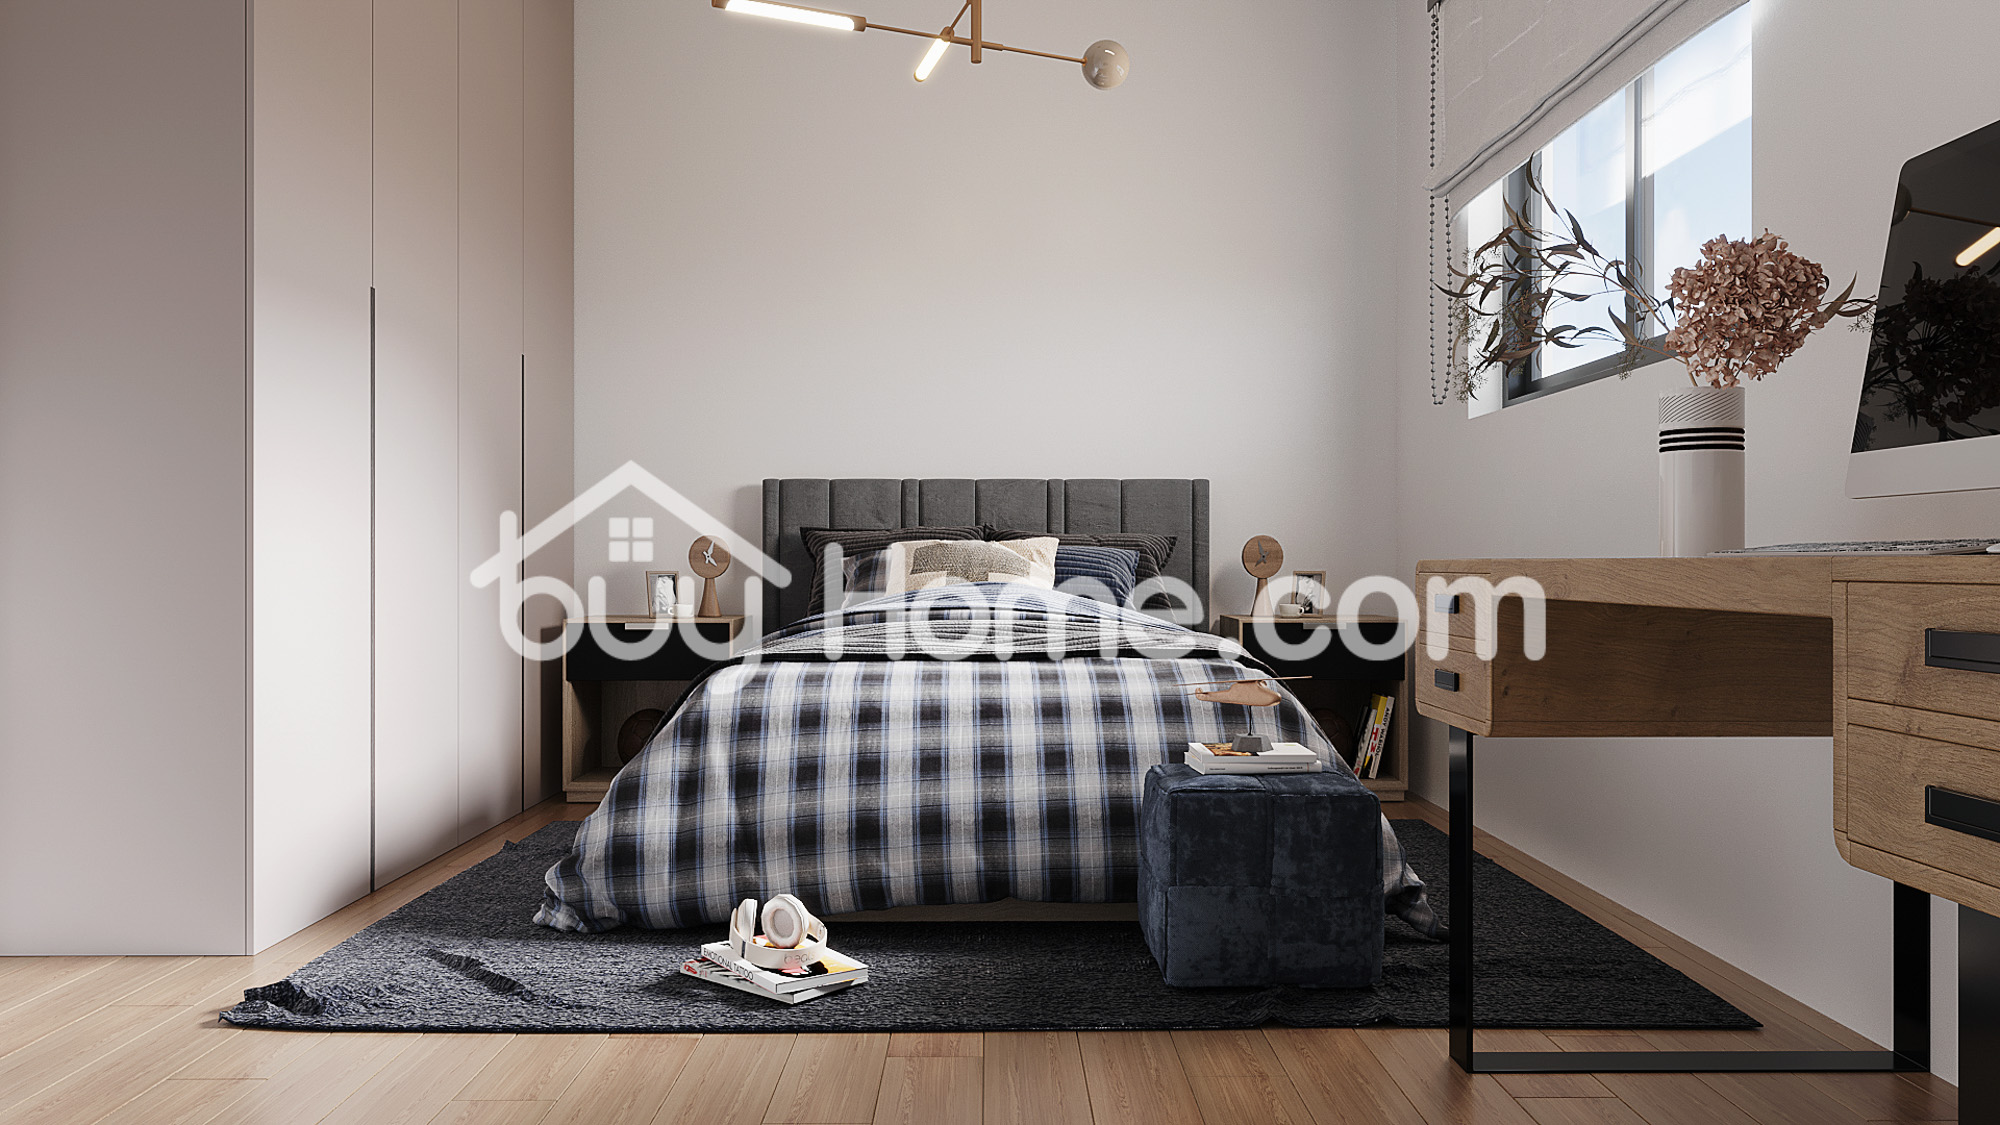 2 BDR apartment | BuyHome